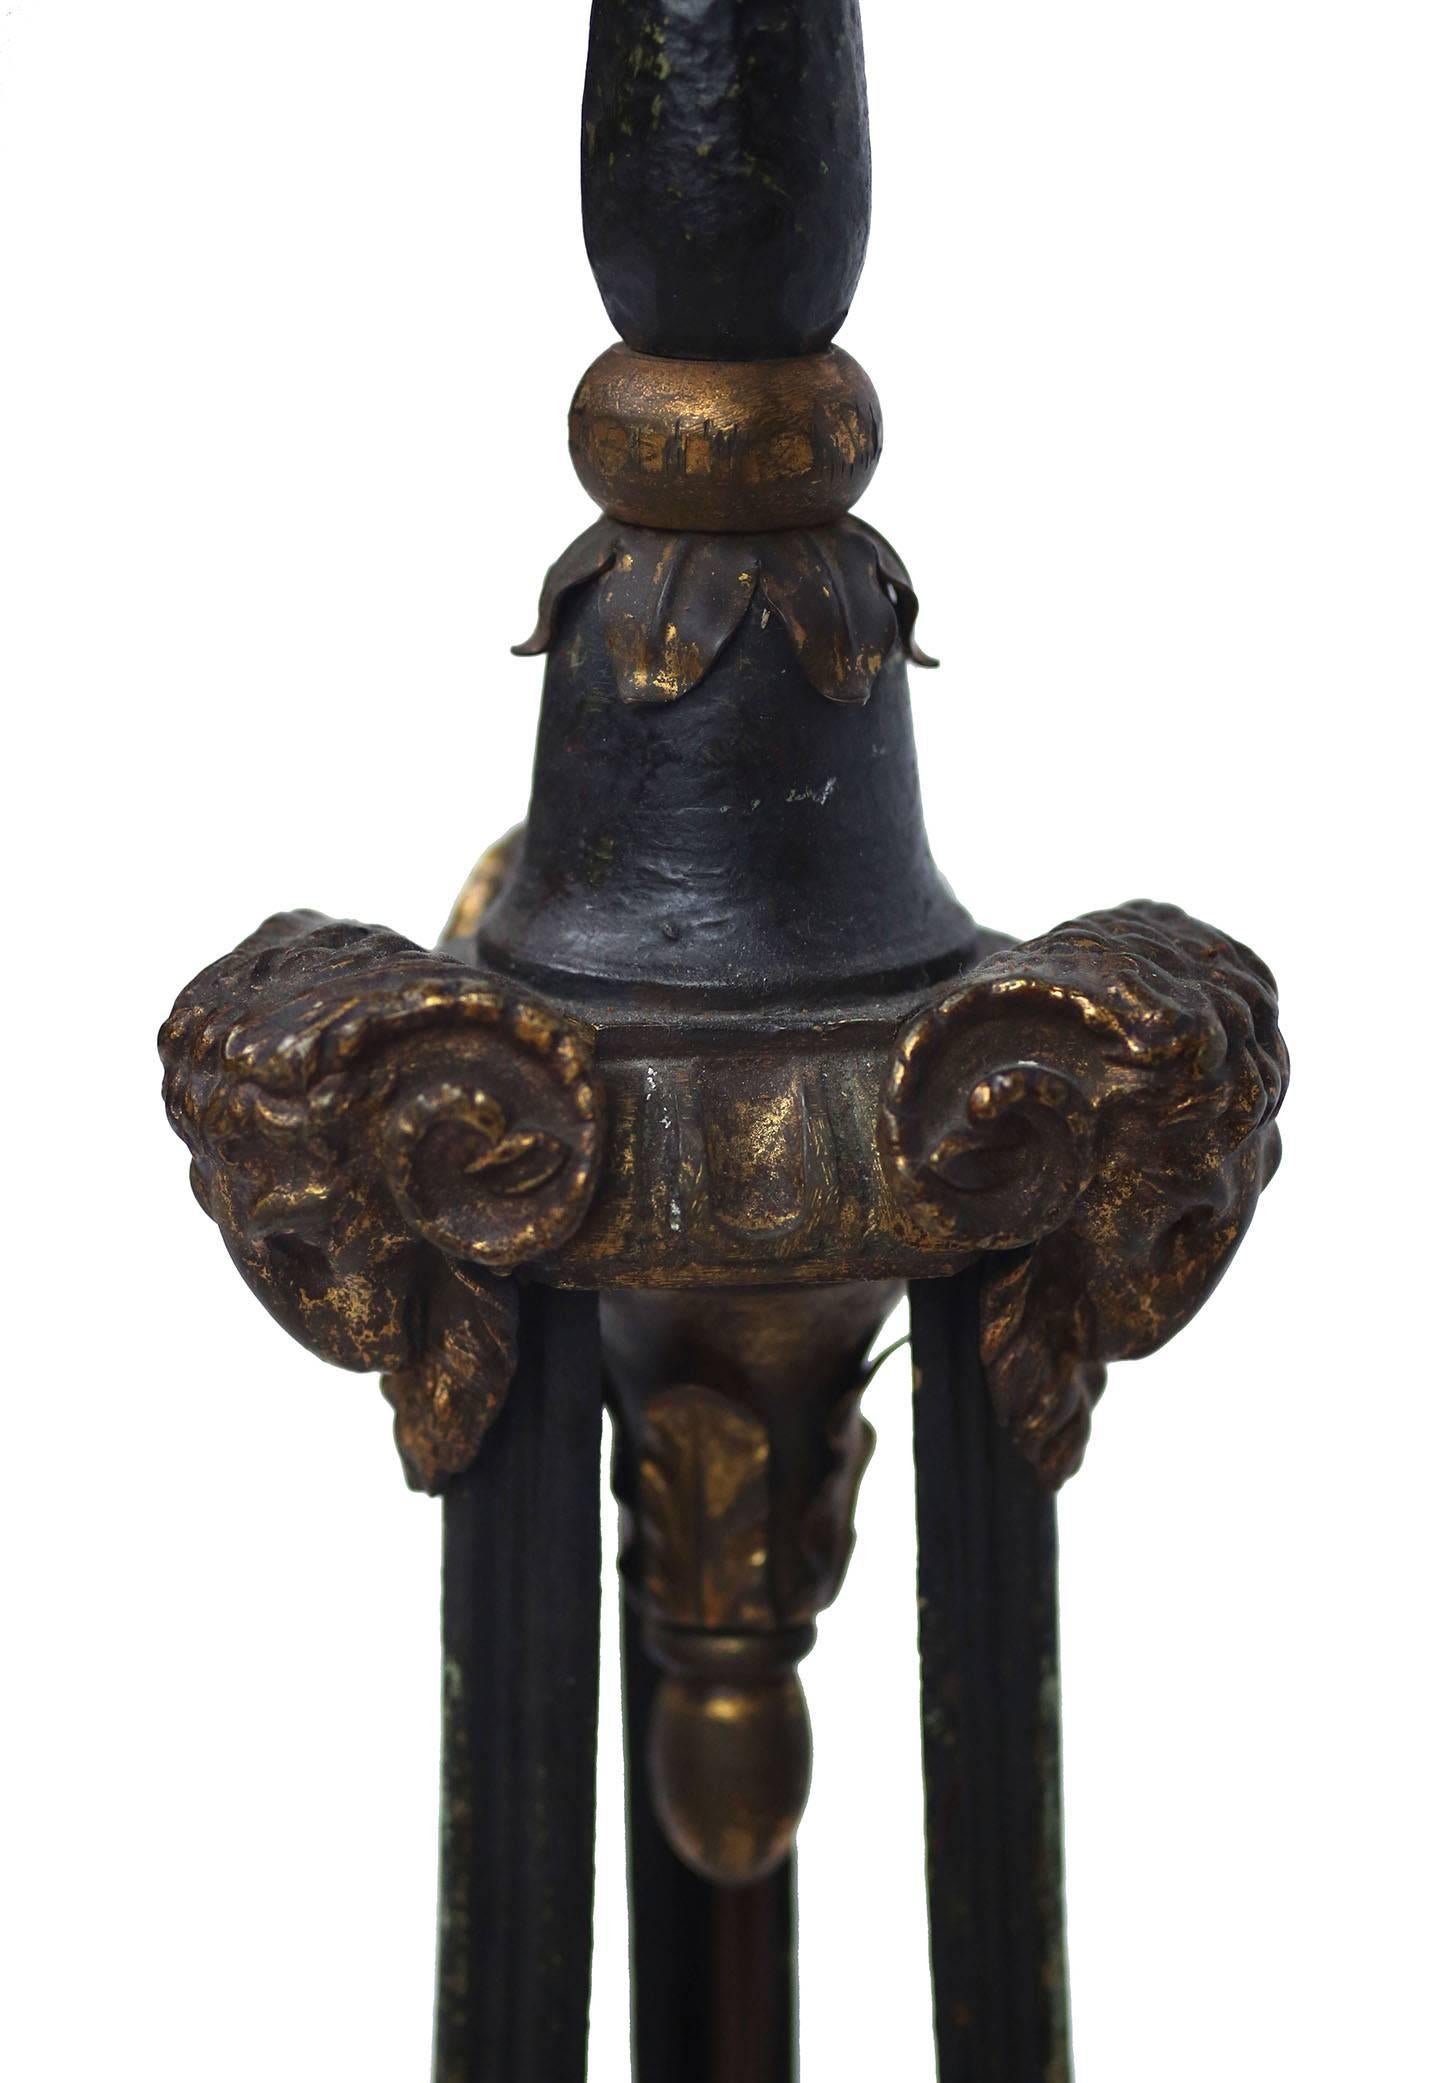 French iron floor lap with tripod base terminating in brass cloven hooves. The upper base is decorated with brass rams heads and foliate turned details. The lamp is painted with a fine verdigris finish and ruby fleck. Offered with a light cream